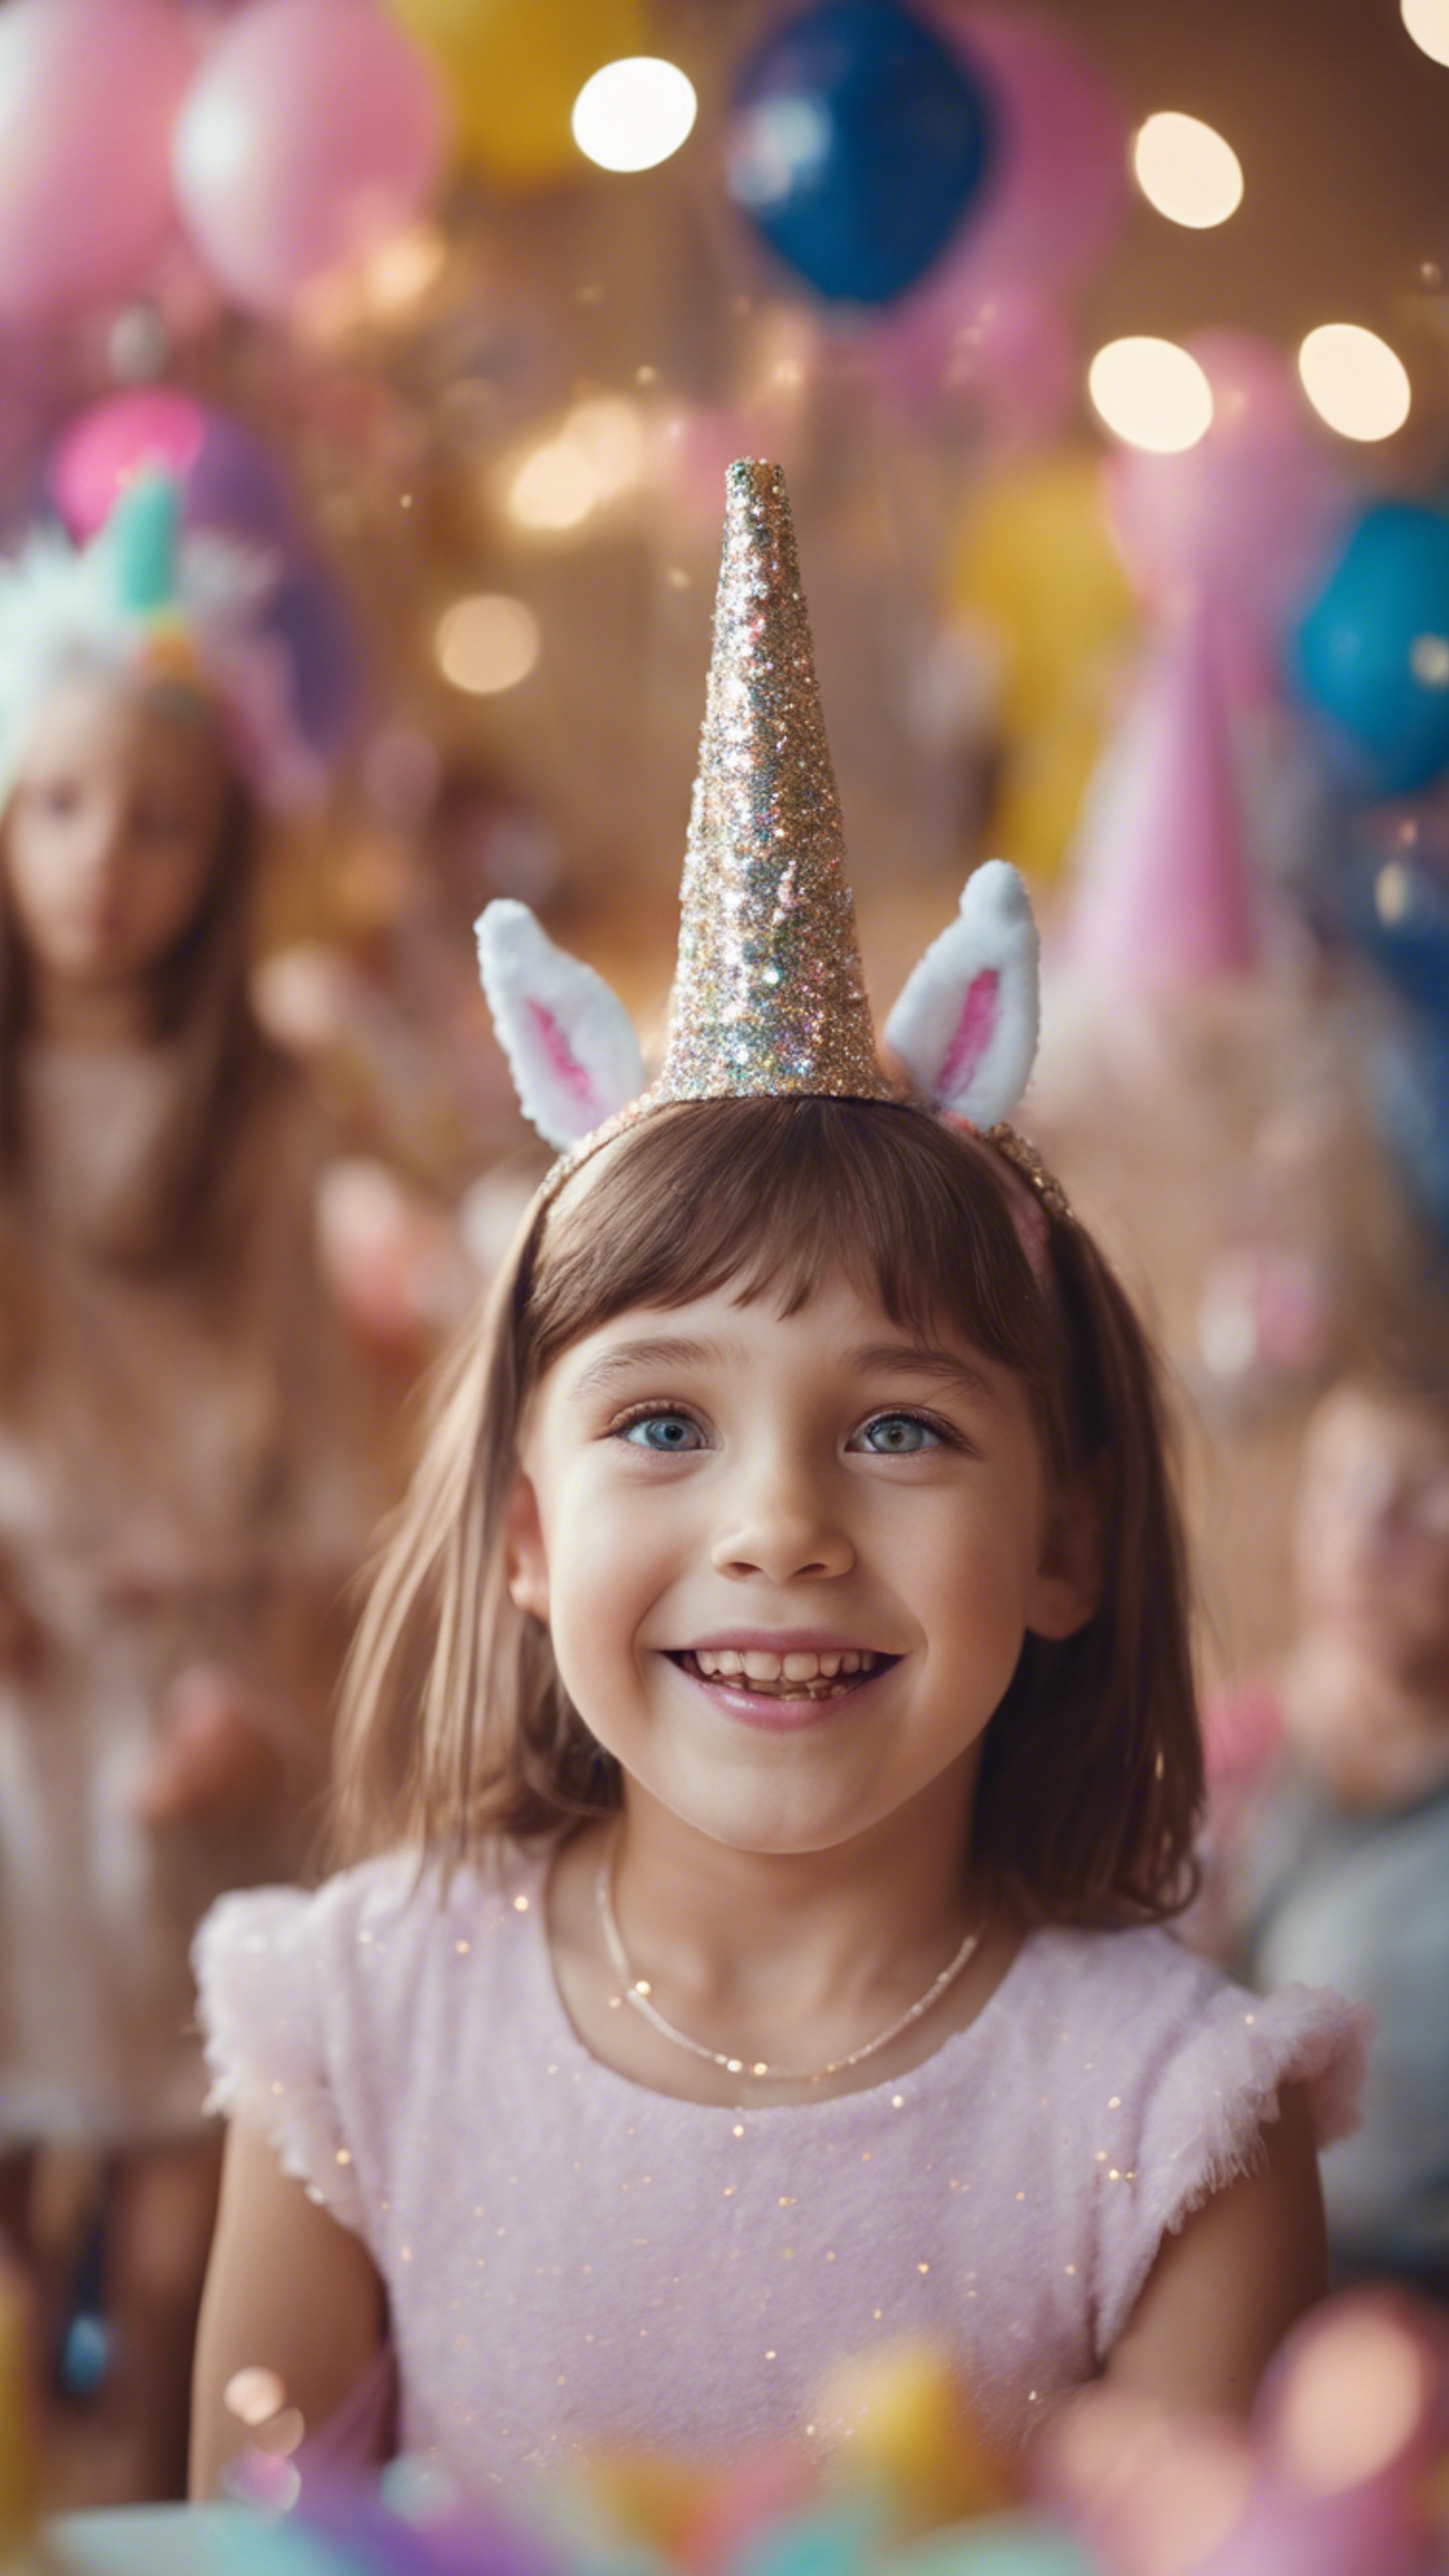 A young girl wearing a cute unicorn headband and shining with joy at her birthday party. Wallpaper[40be368353f74b5c94ef]